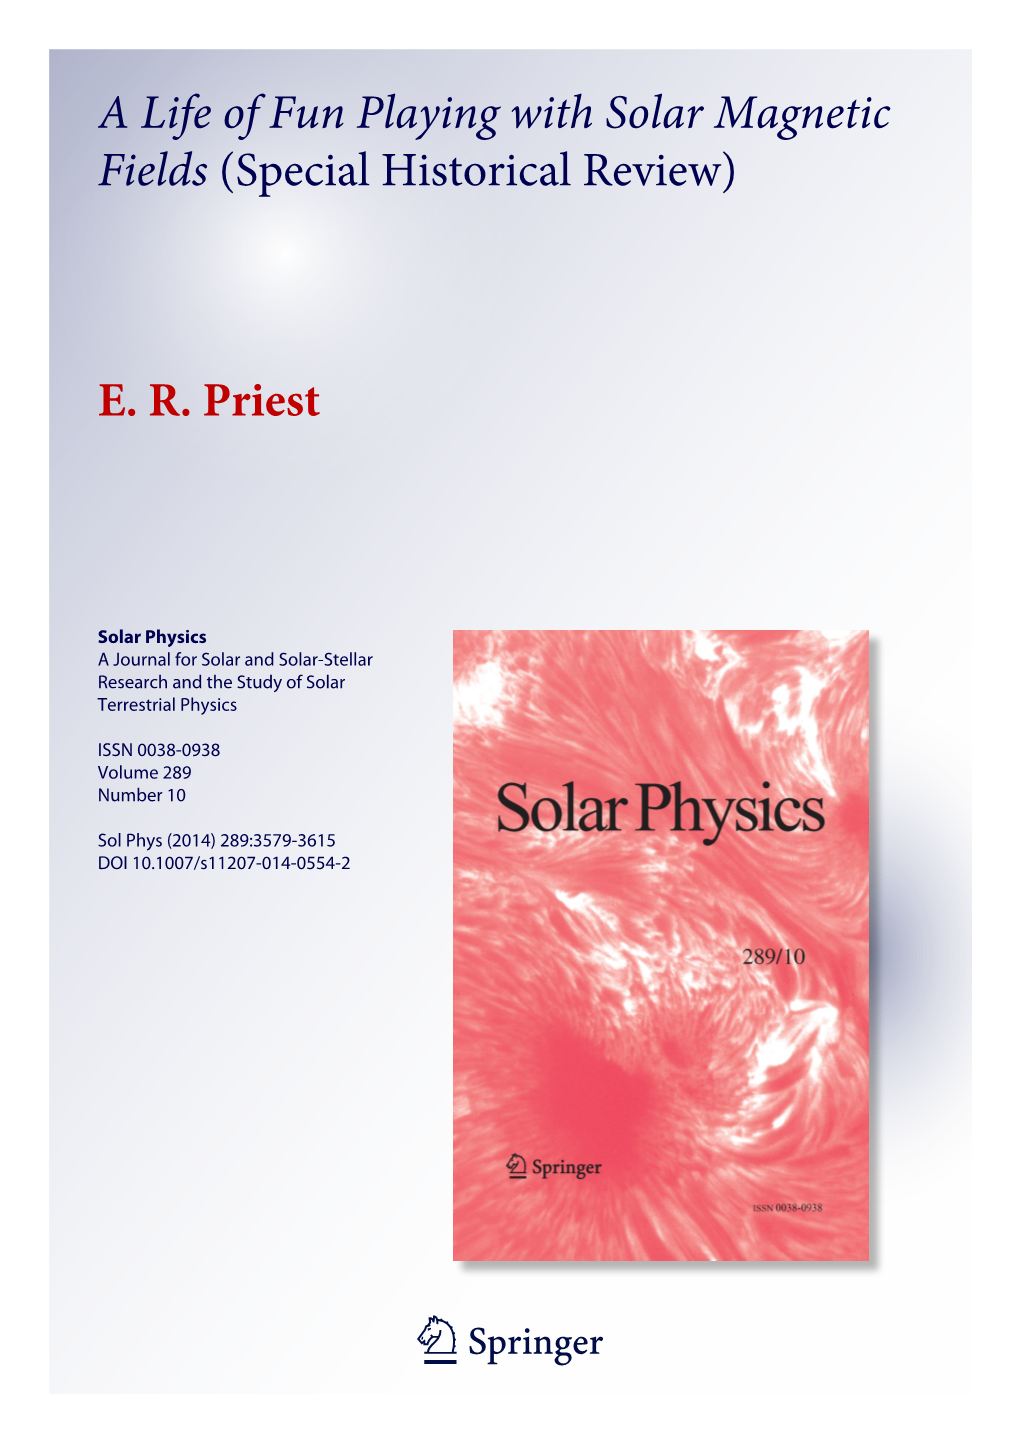 A Life of Fun Playing with Solar Magnetic Fields (Special Historical Review)